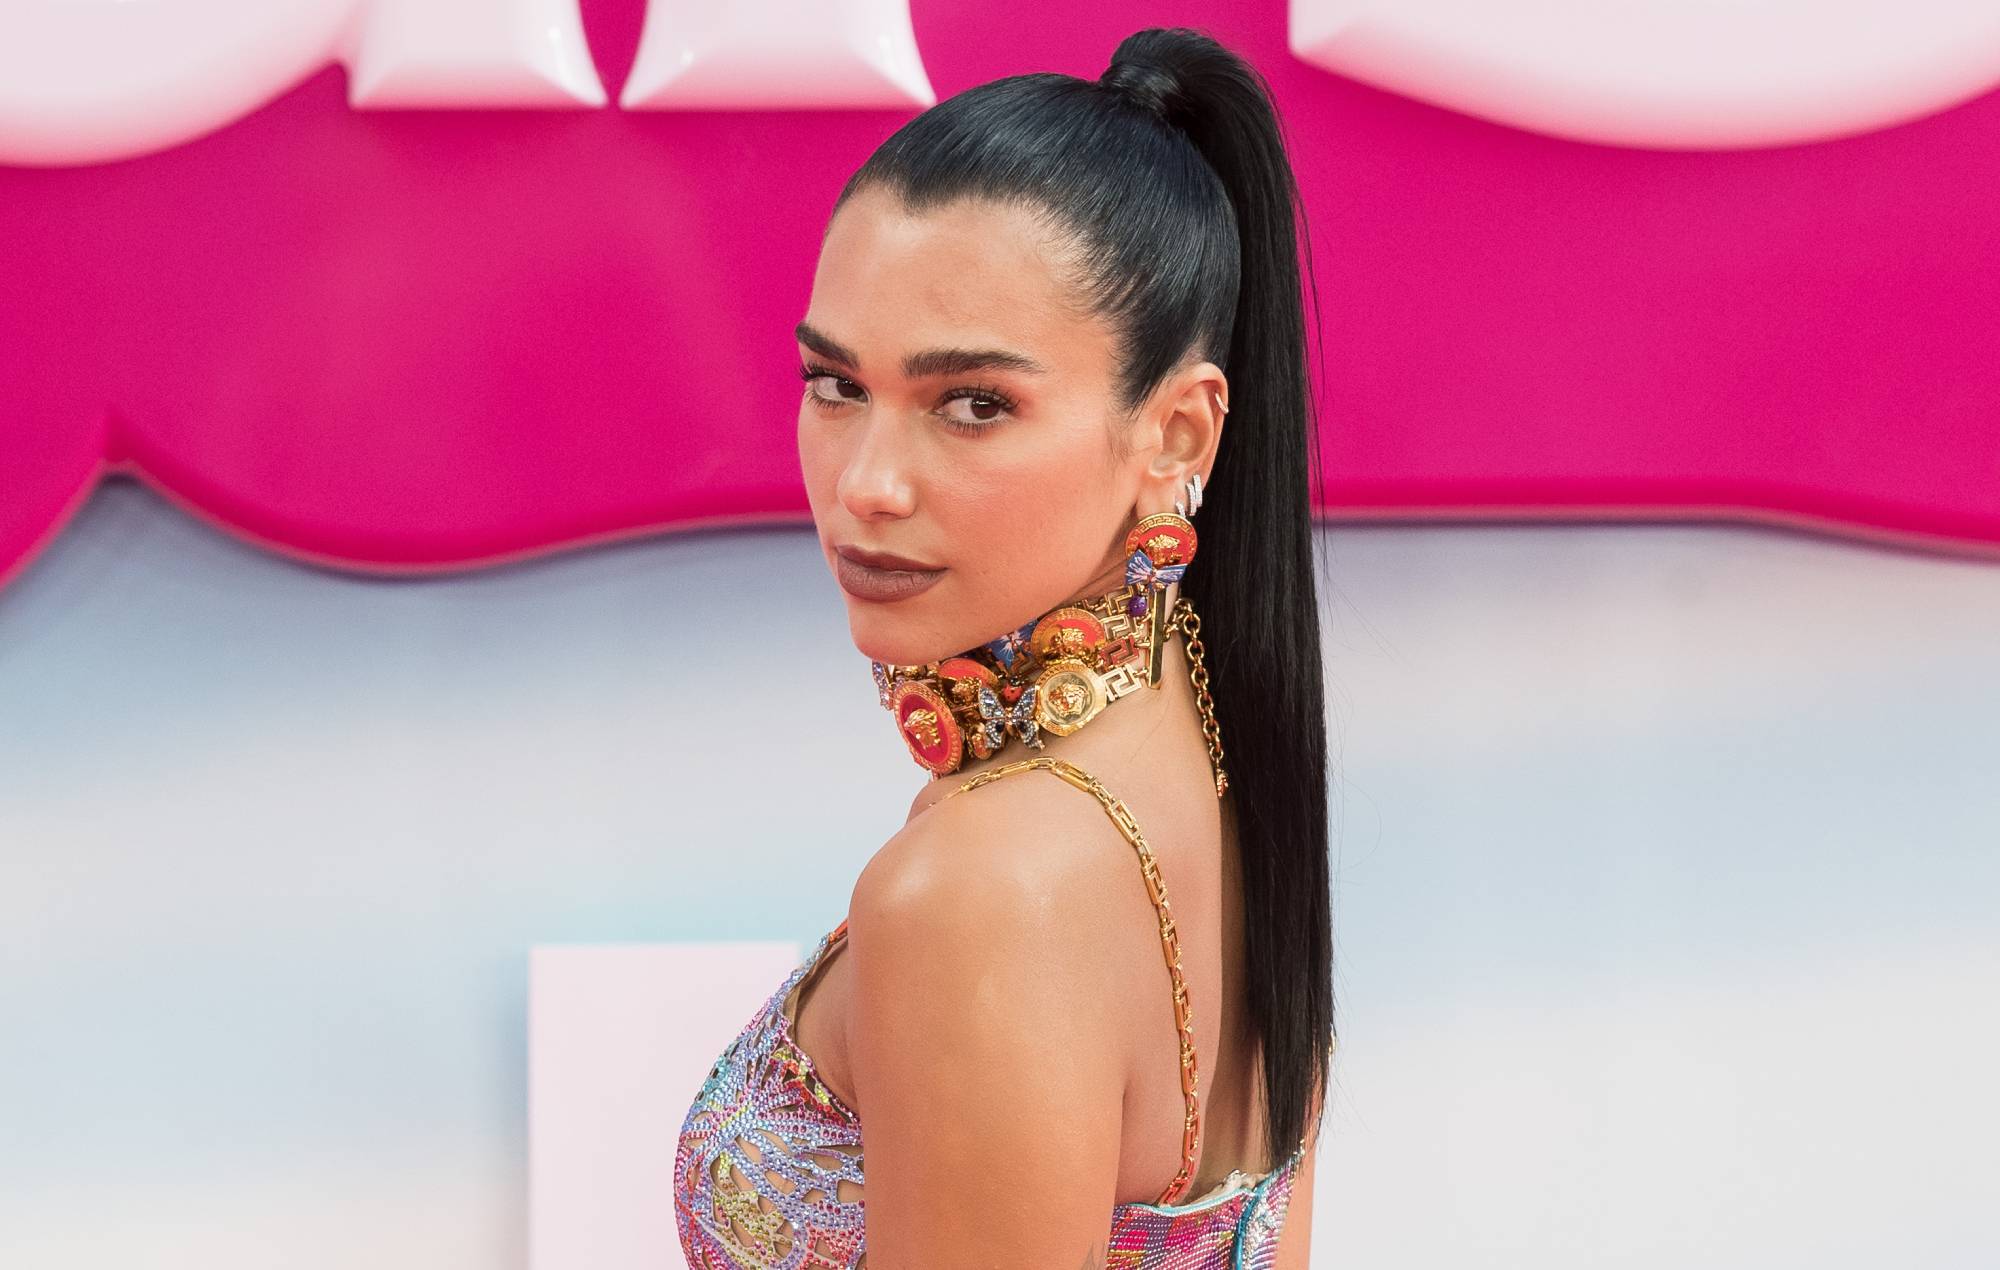 Dua Lipa continues hinting at new music with another social media teaser